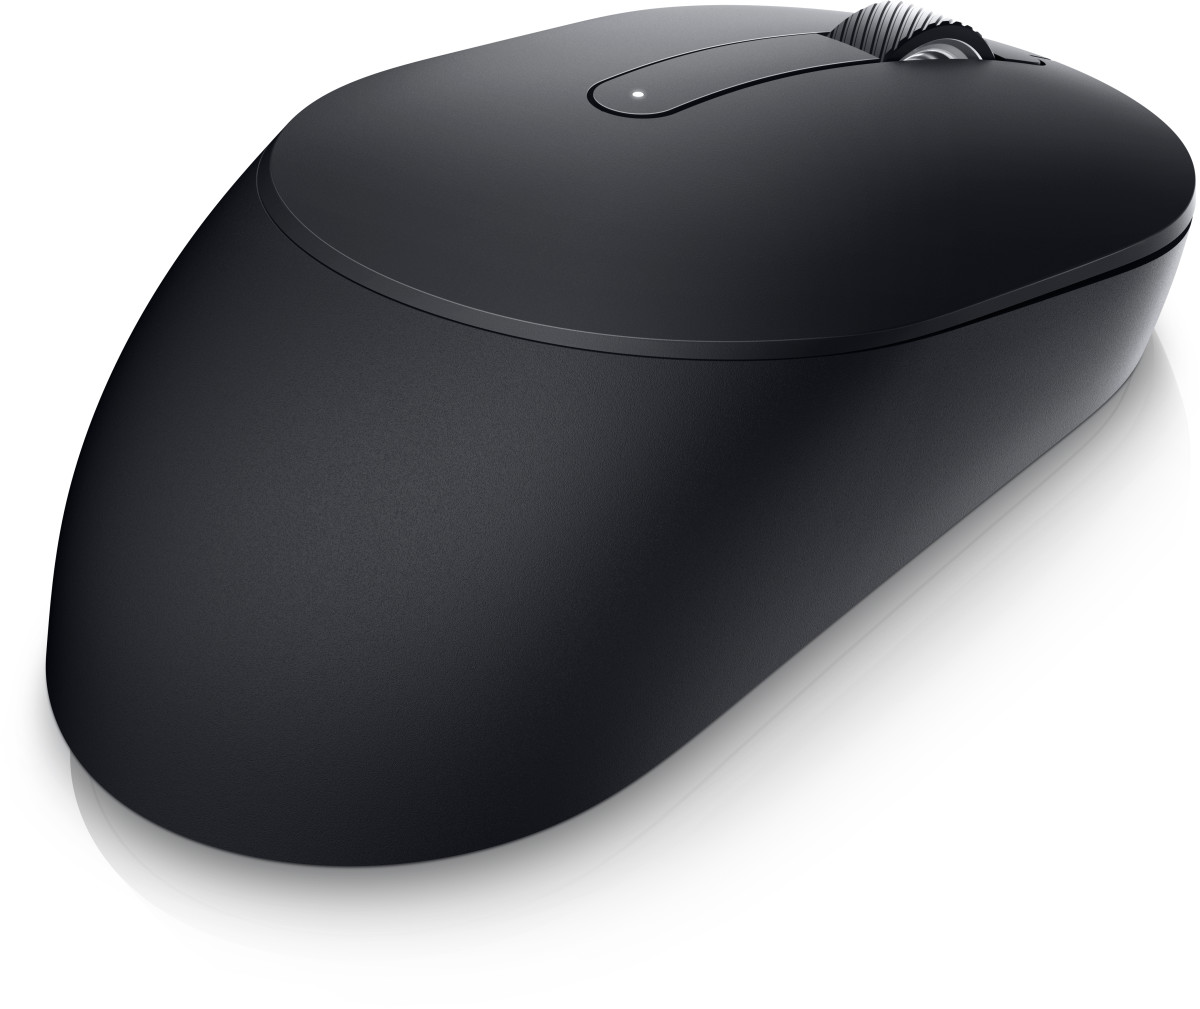 Full-Size Wireless Mouse - MS300